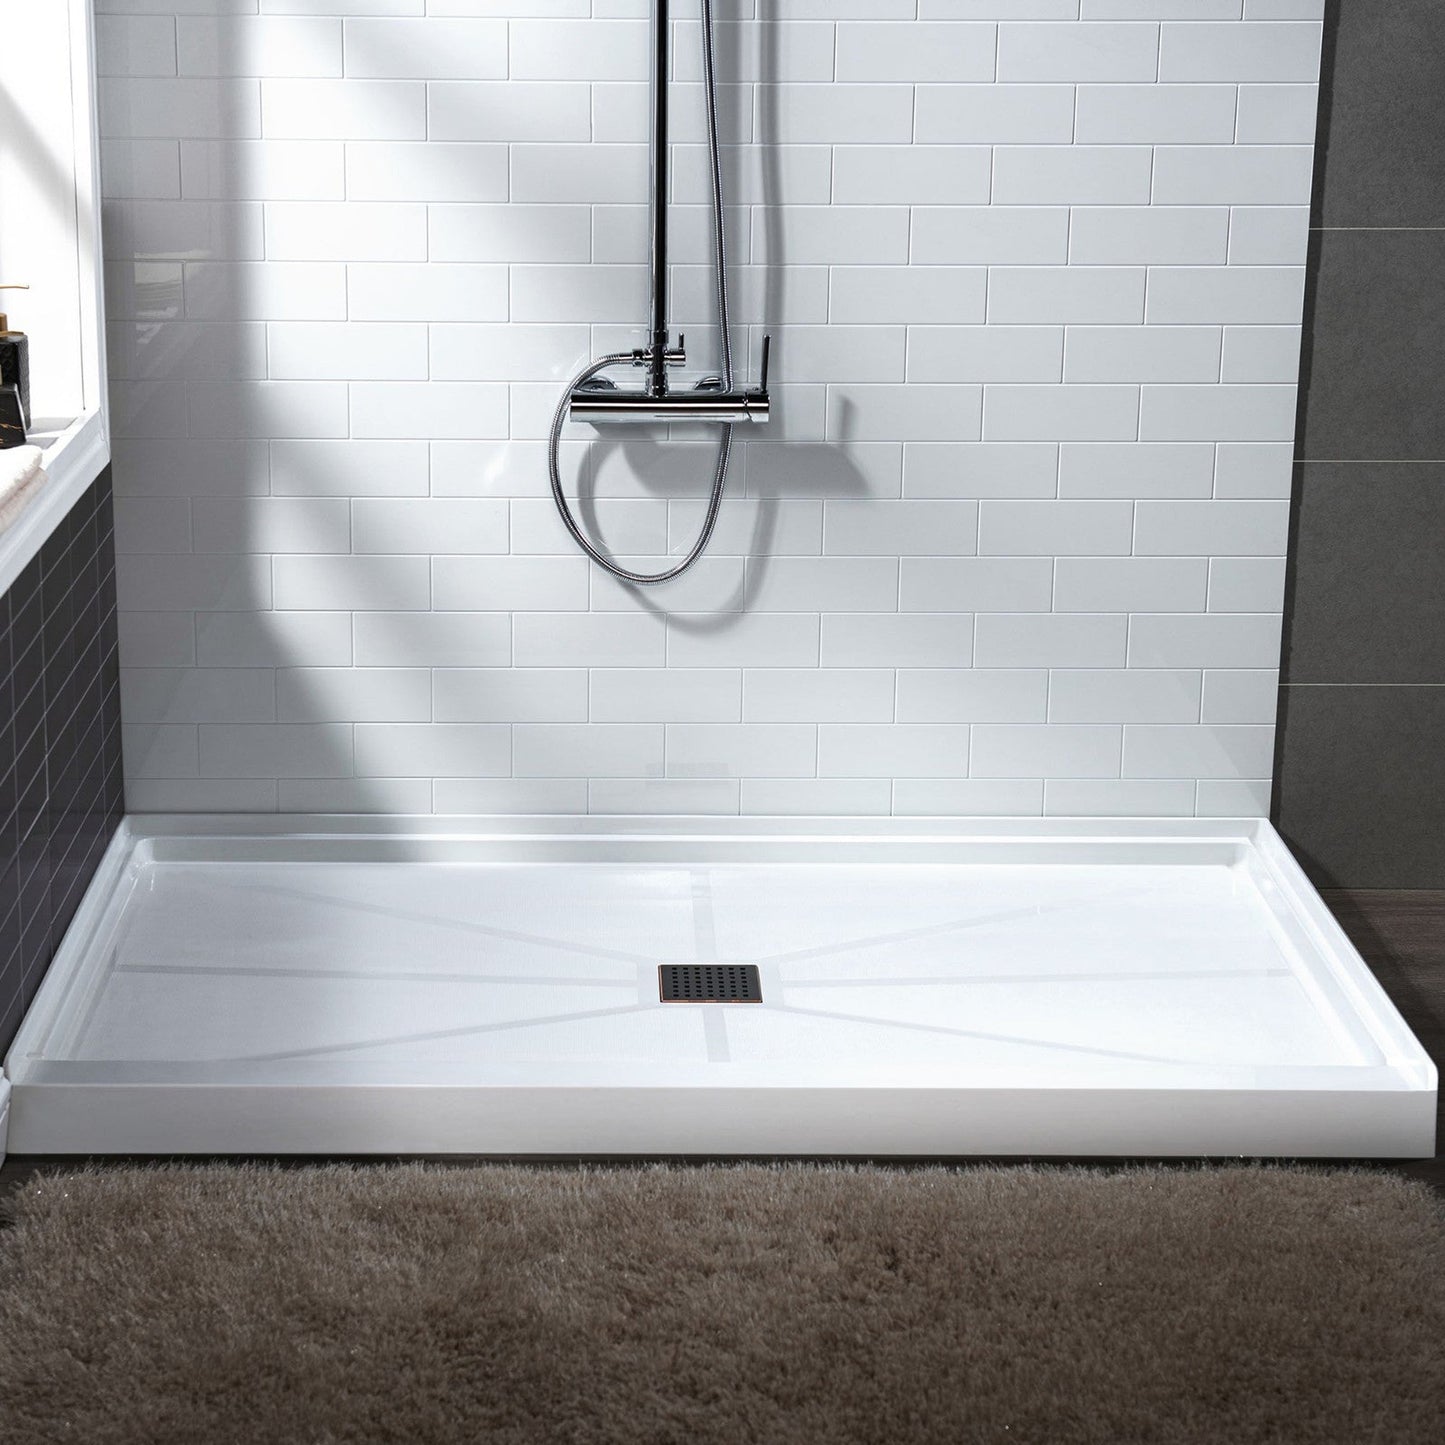 WoodBridge 60" x 30" White Solid Surface Shower Base Center Drain Location With Oil Rubbed Bronze Trench Drain Cover